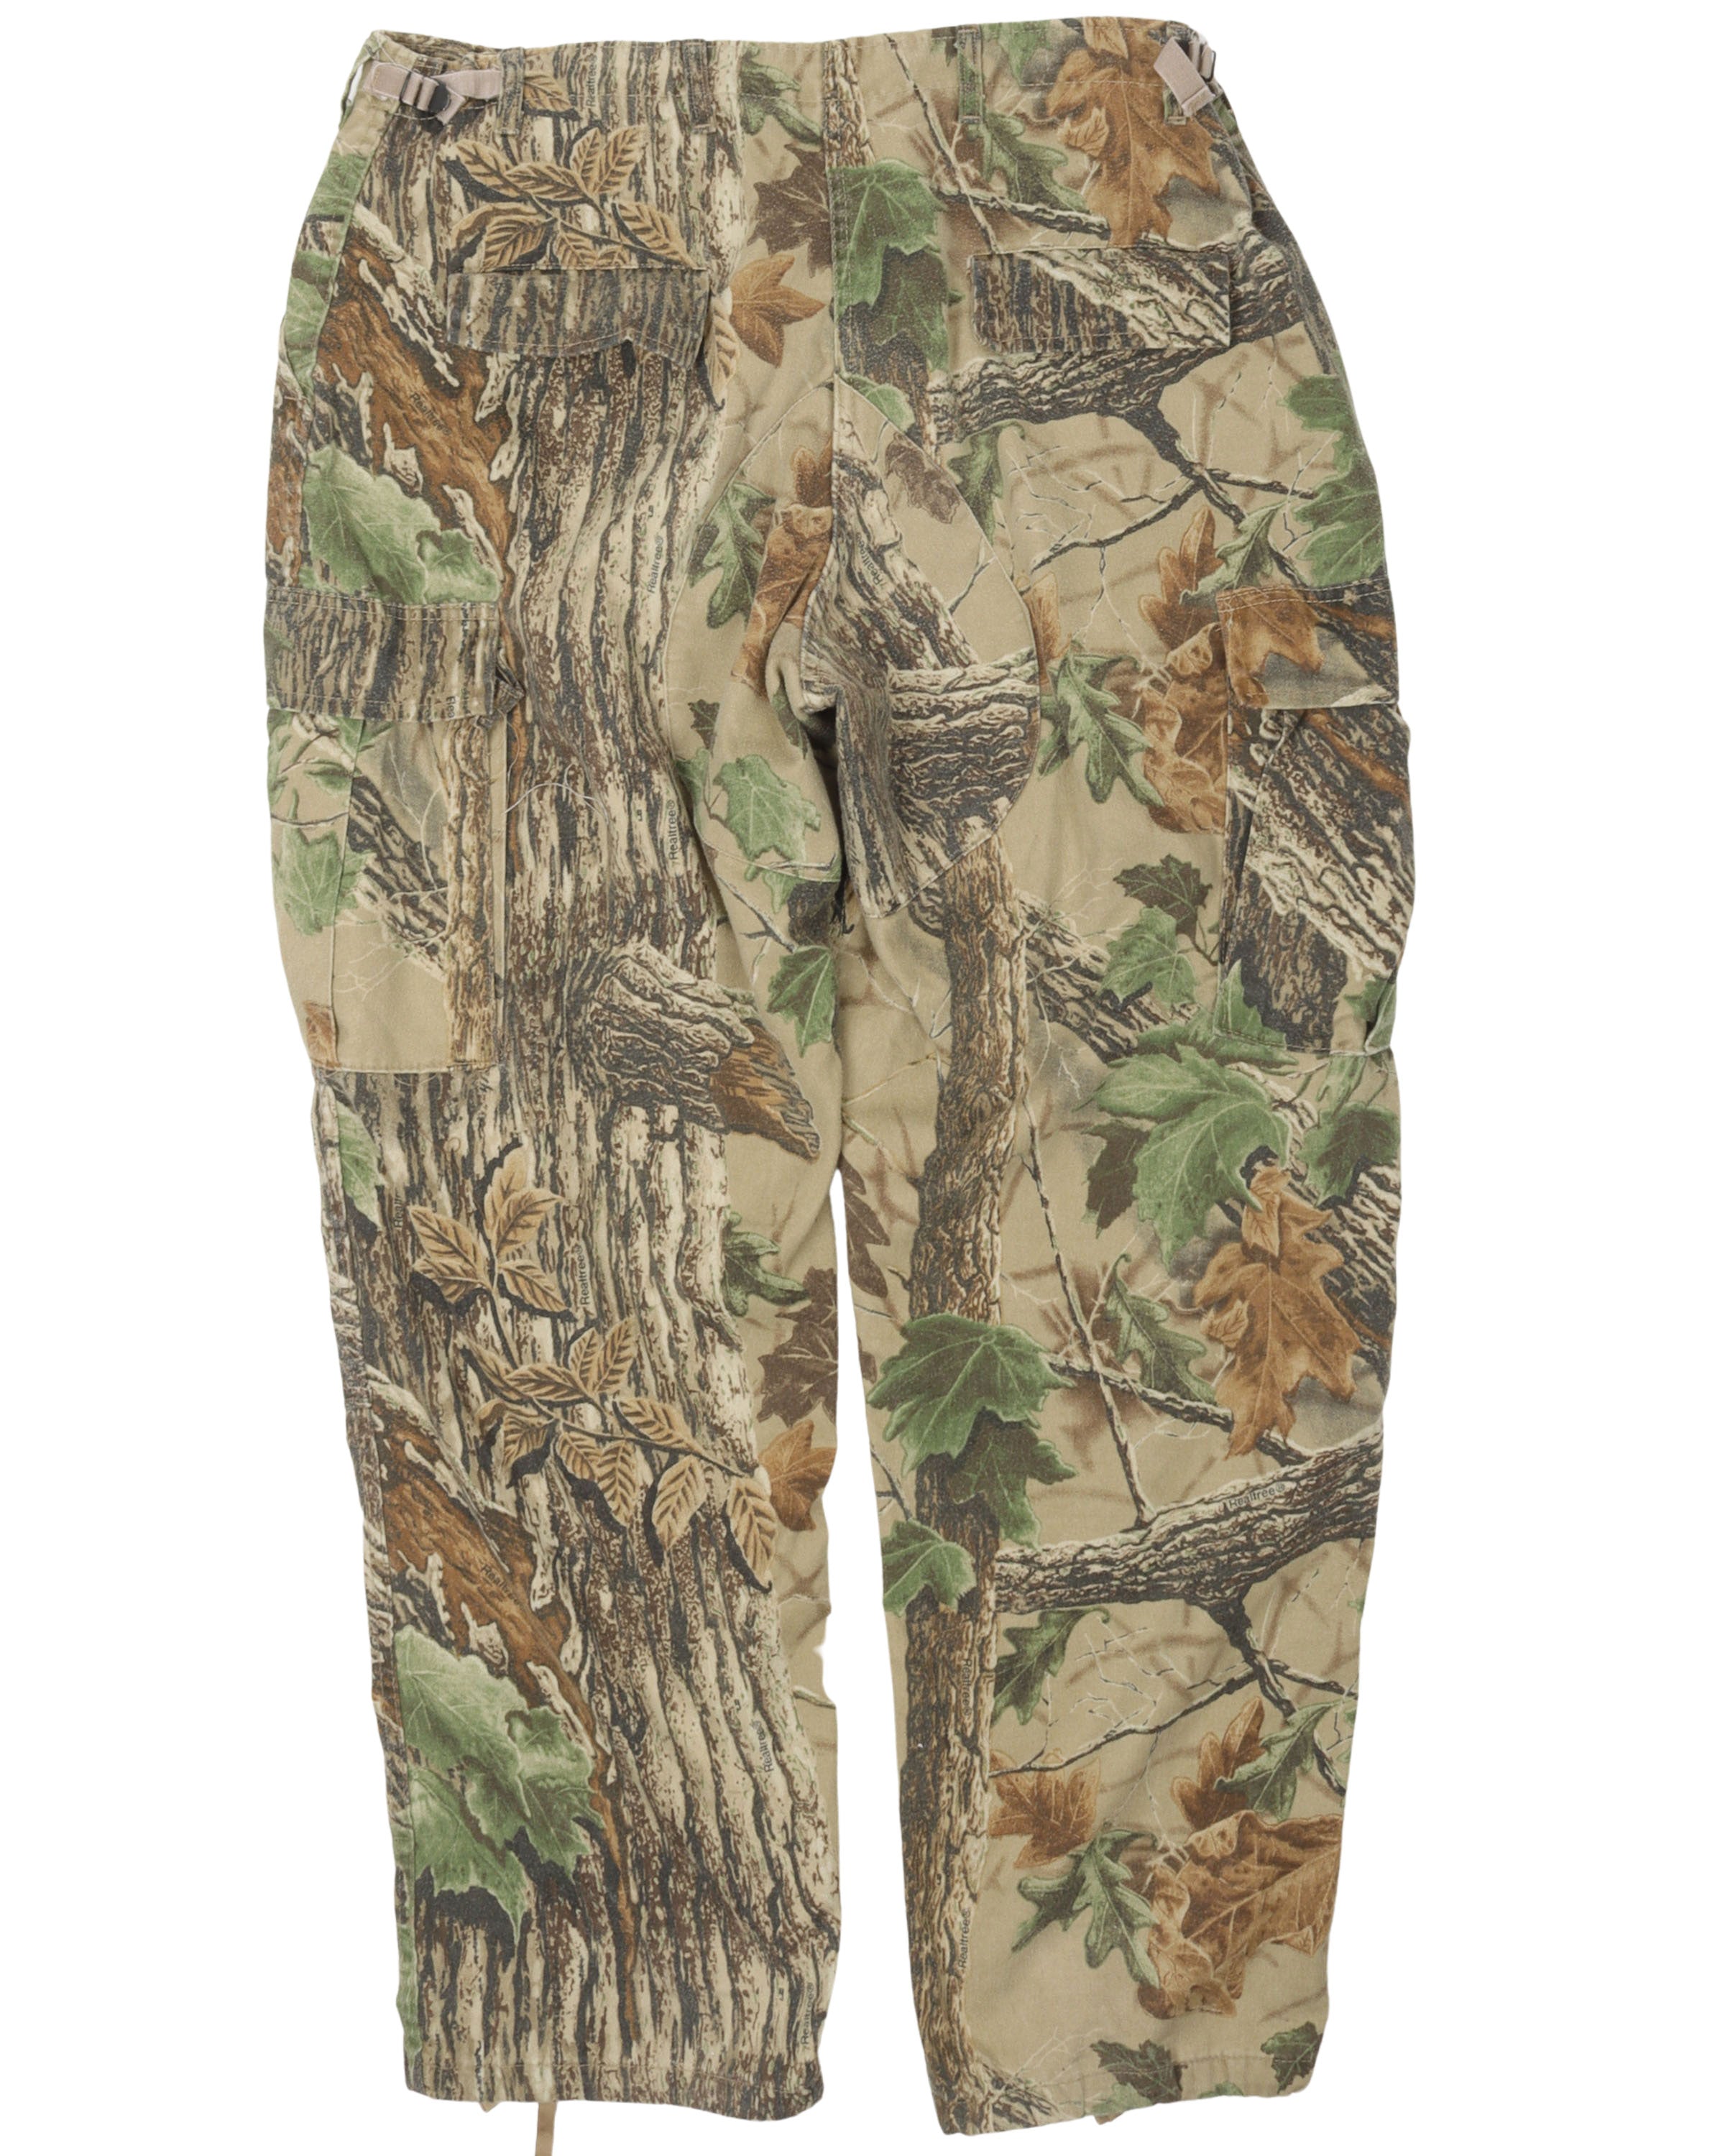 RealTree Camouflage Cargo Pants